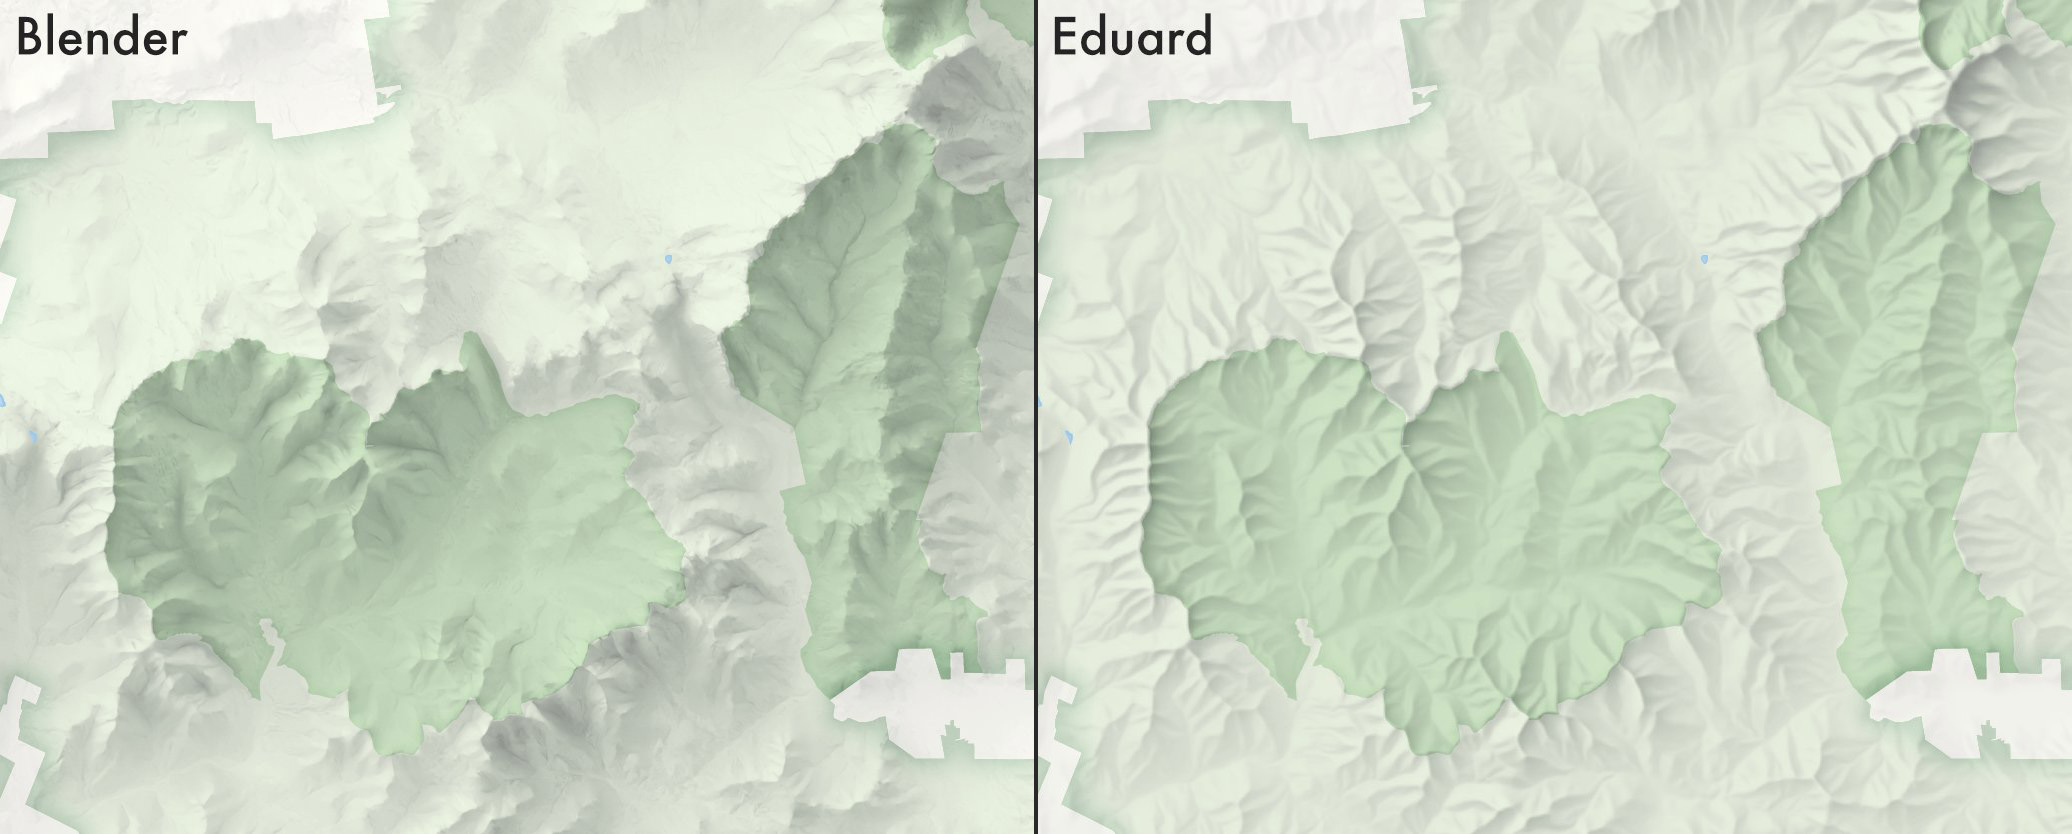 Side by side comparison of Blender and Eduard shaded relief for this region